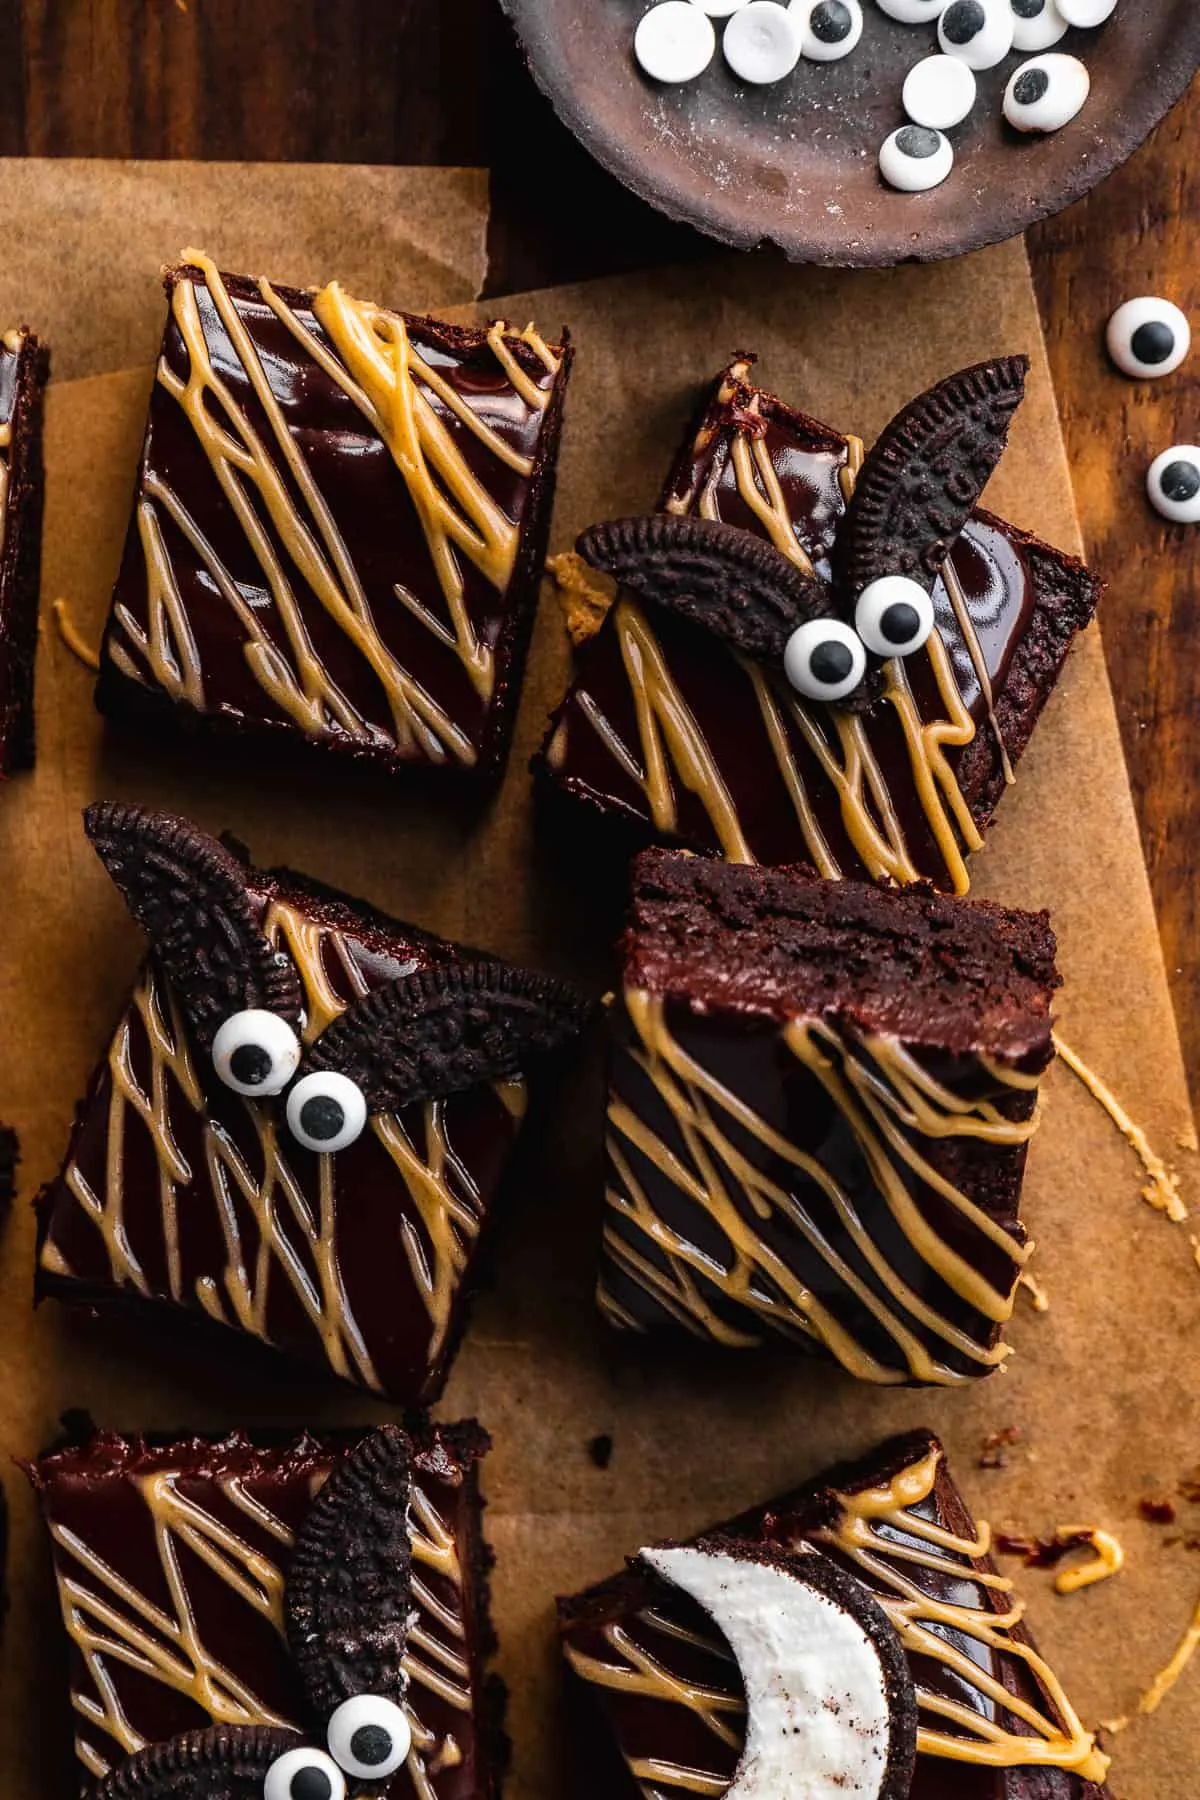 gluten free bat brownies decorated with candy eyes and gluten free Oreo cookies on brown parchment paper on top of a brown wood cutting board